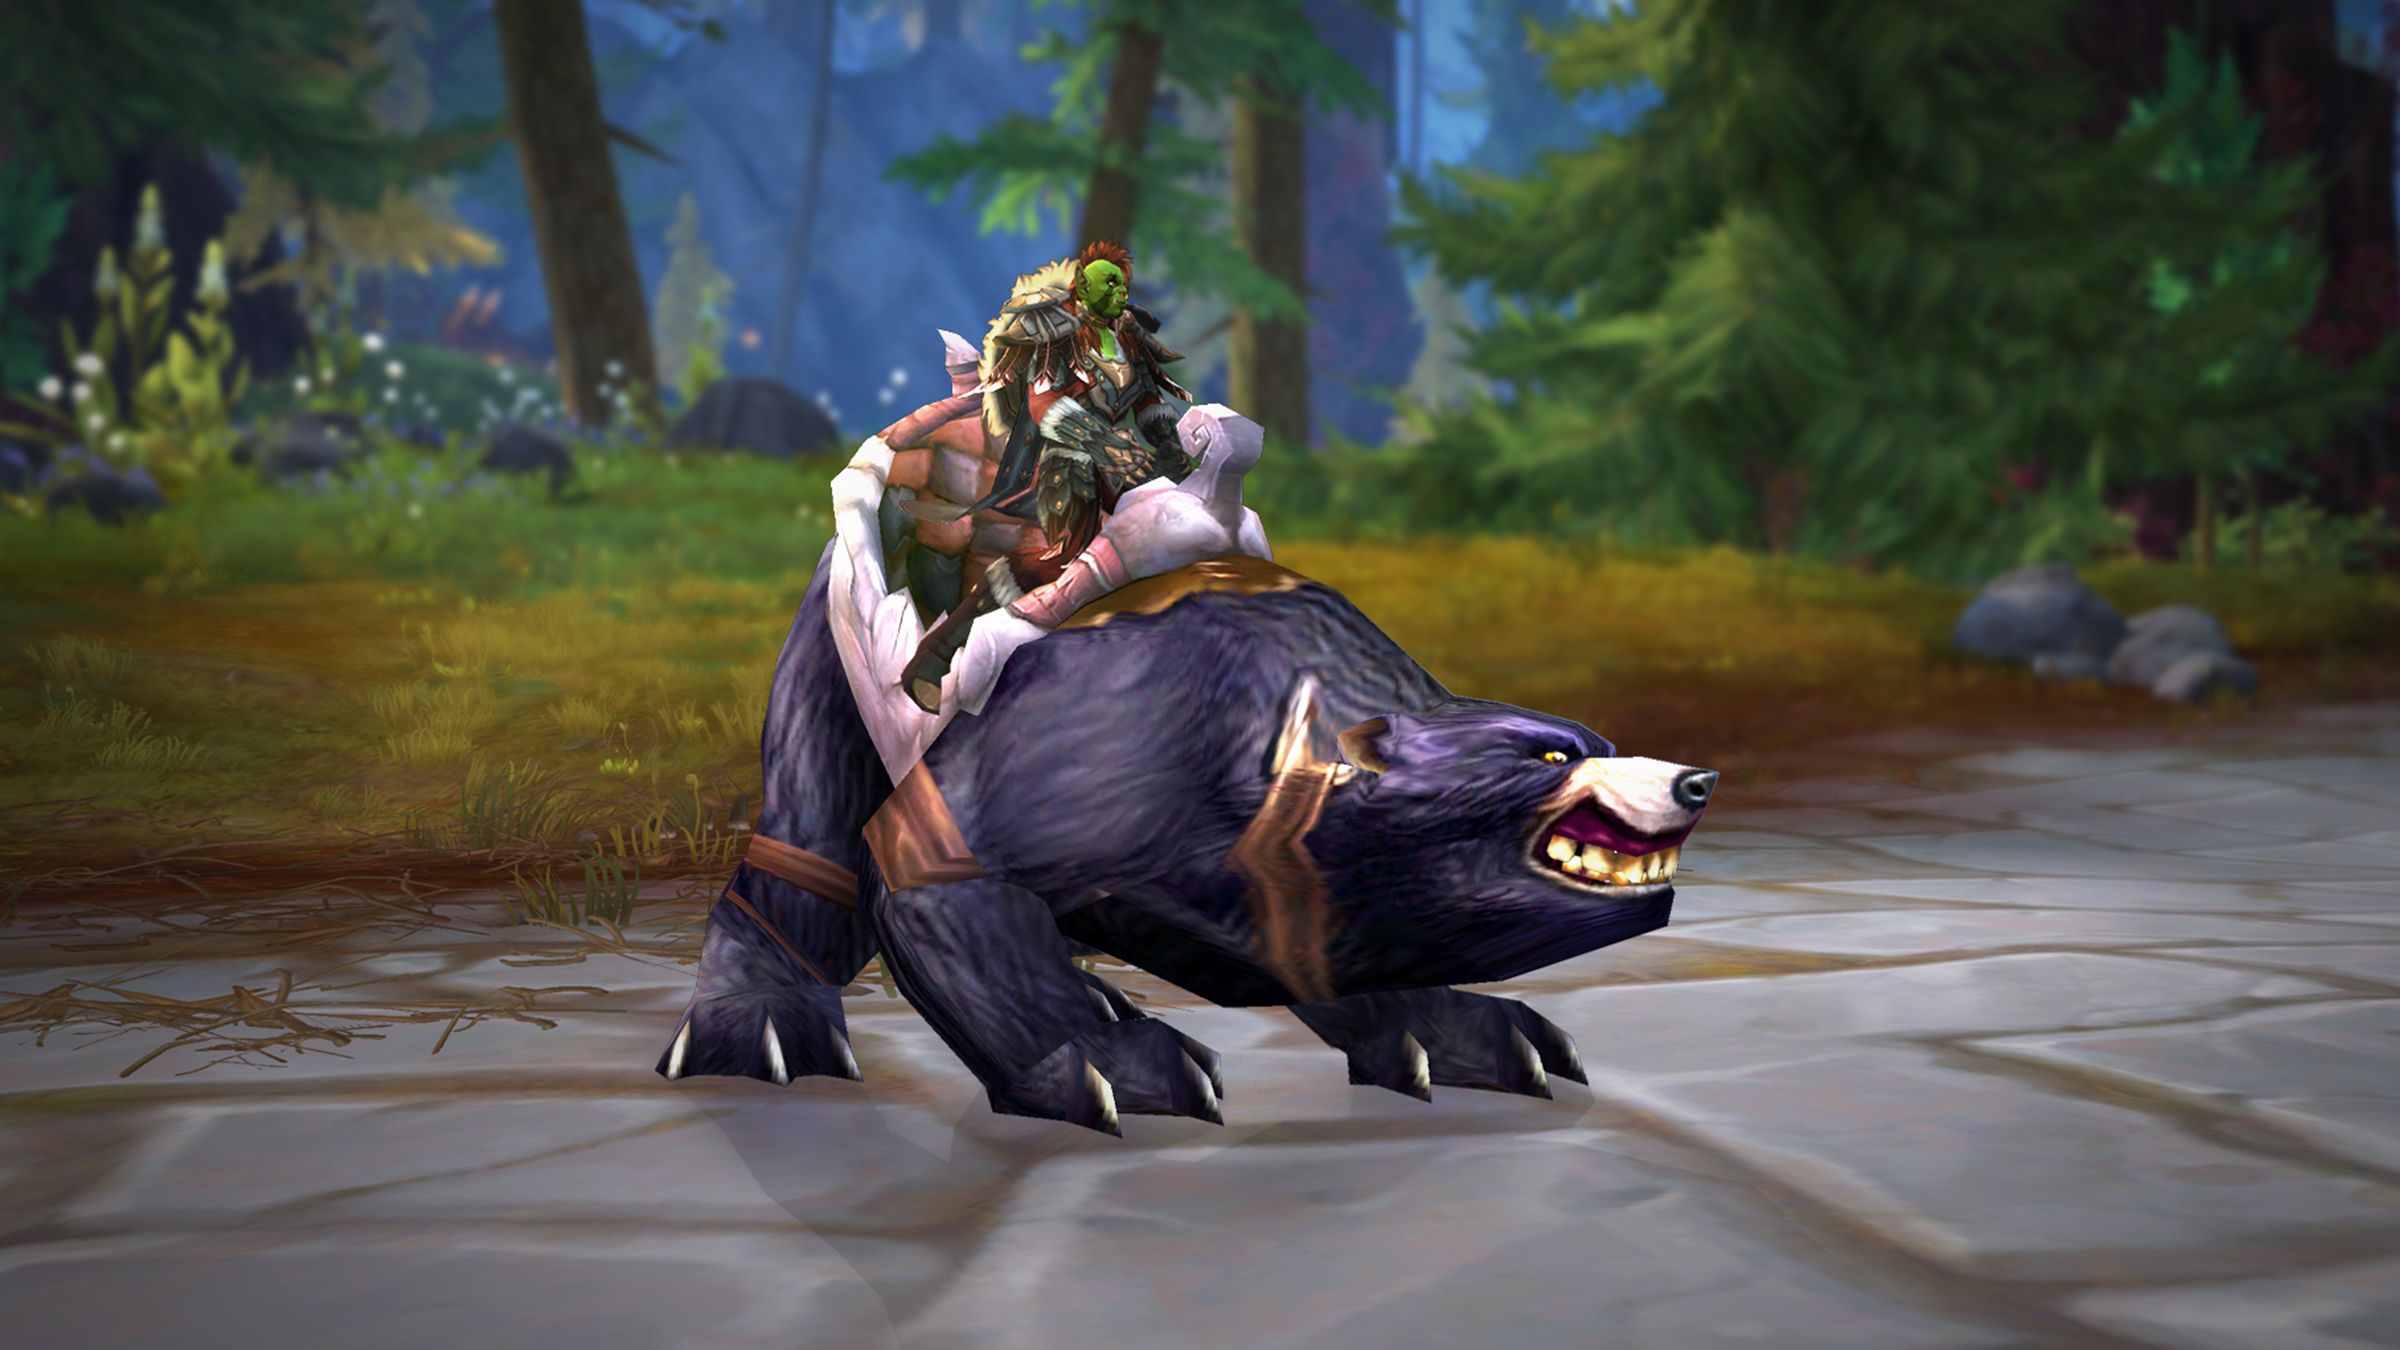 [Promotion Ending] WoW Loot for Prime Gaming Members: Get the Big Battle Bear